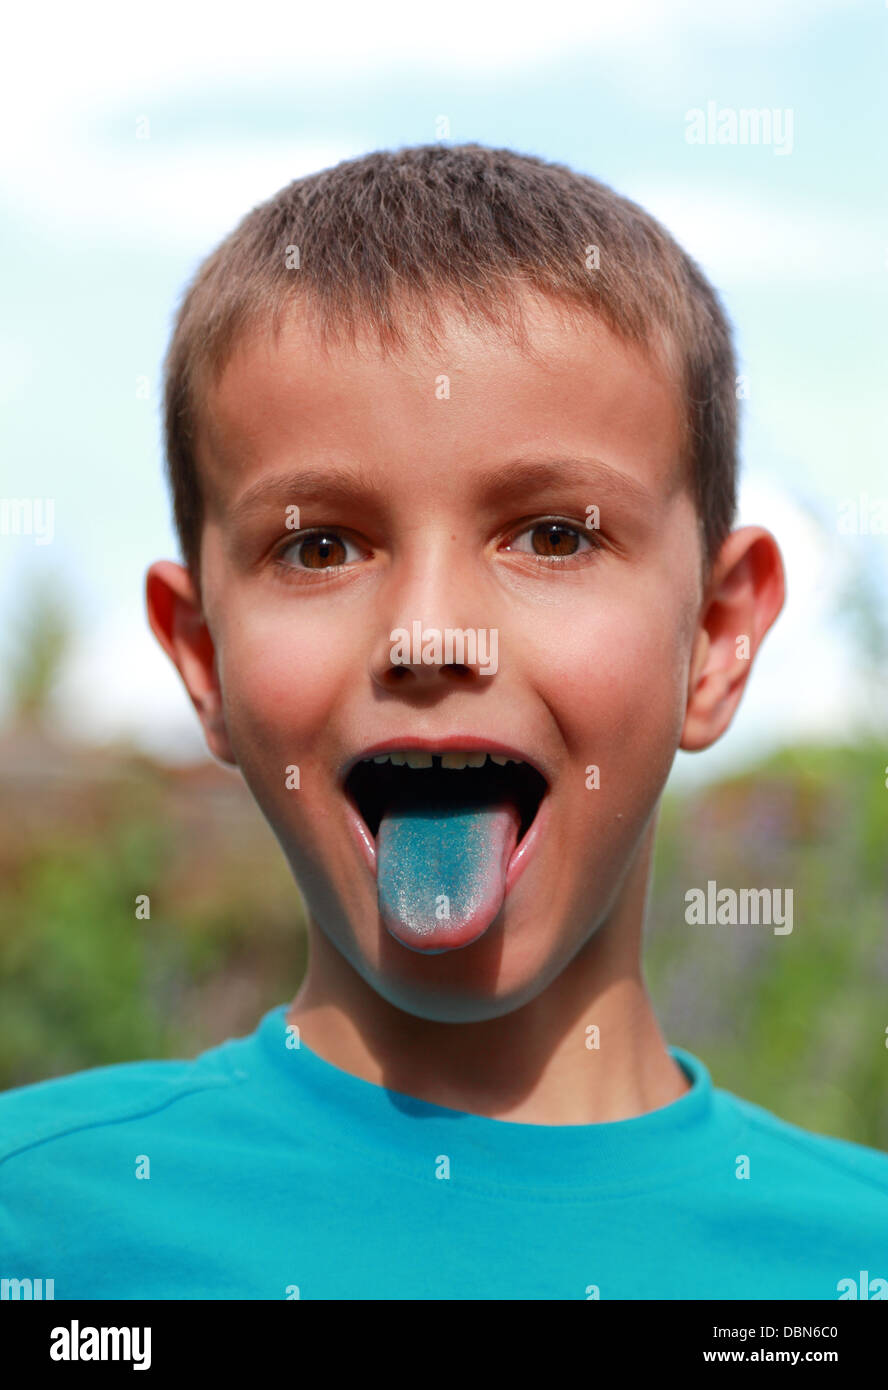 Face of a kid showing his tongue. His tongue is all blue. Focused on the face. 1 white kid of 7 years old. Stock Photo